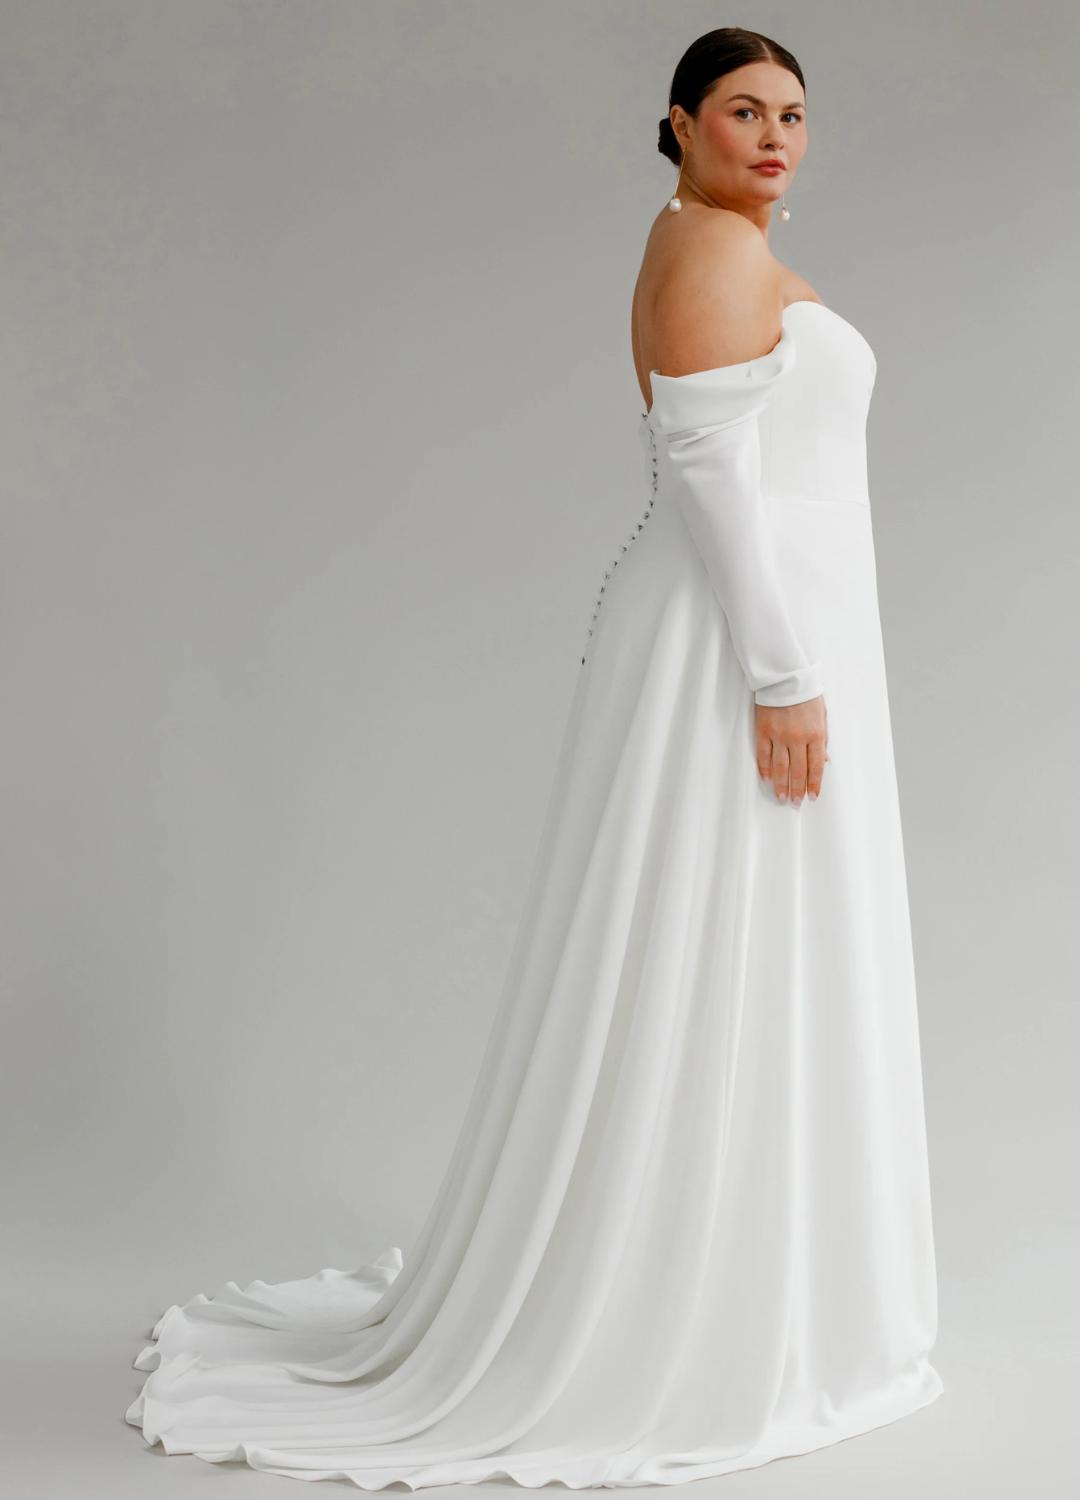 Modest Satin Silk Ballgown Wedding Dress With Beading, Long Sleeves, Boat  Neckline, And S Sleeved Design For Formal Country Western Brides From  Totallymodest, $105.29 | DHgate.Com